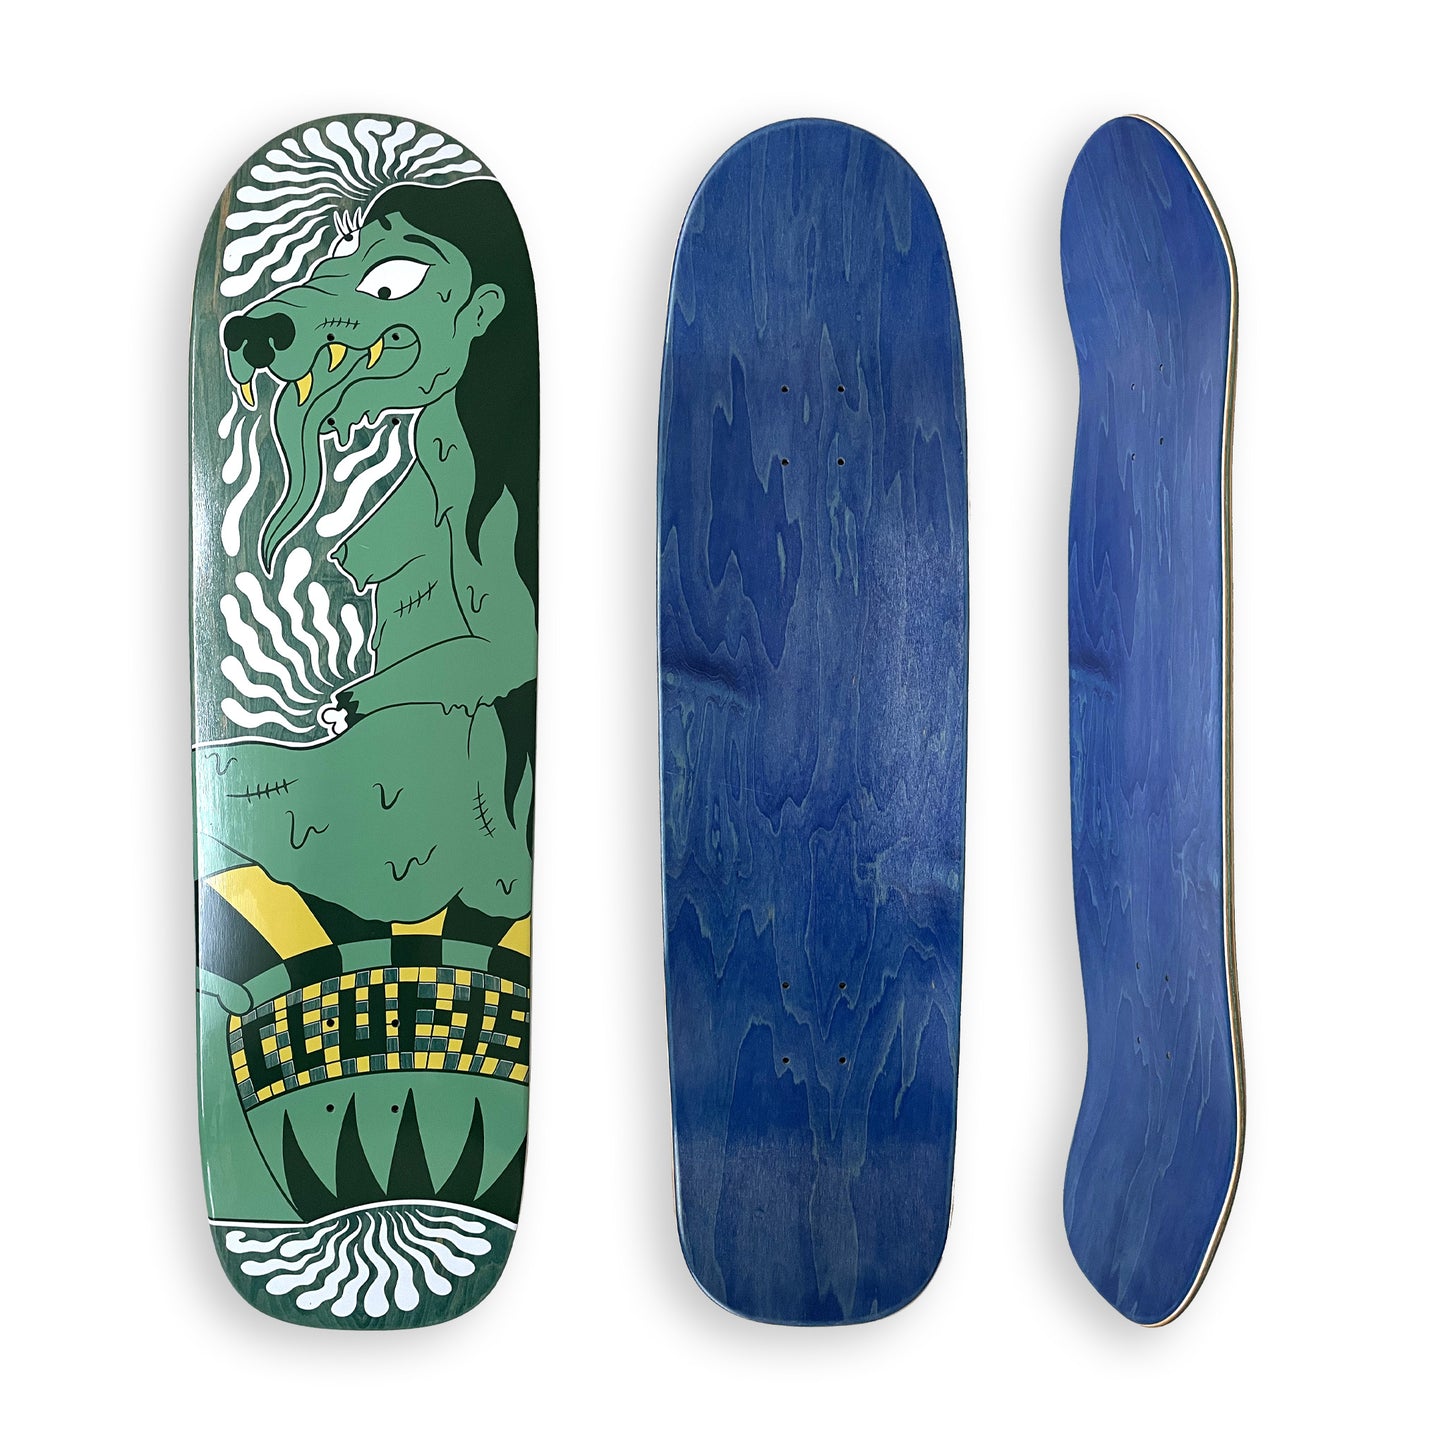 Clumsy skateboards Margelle 8.5"